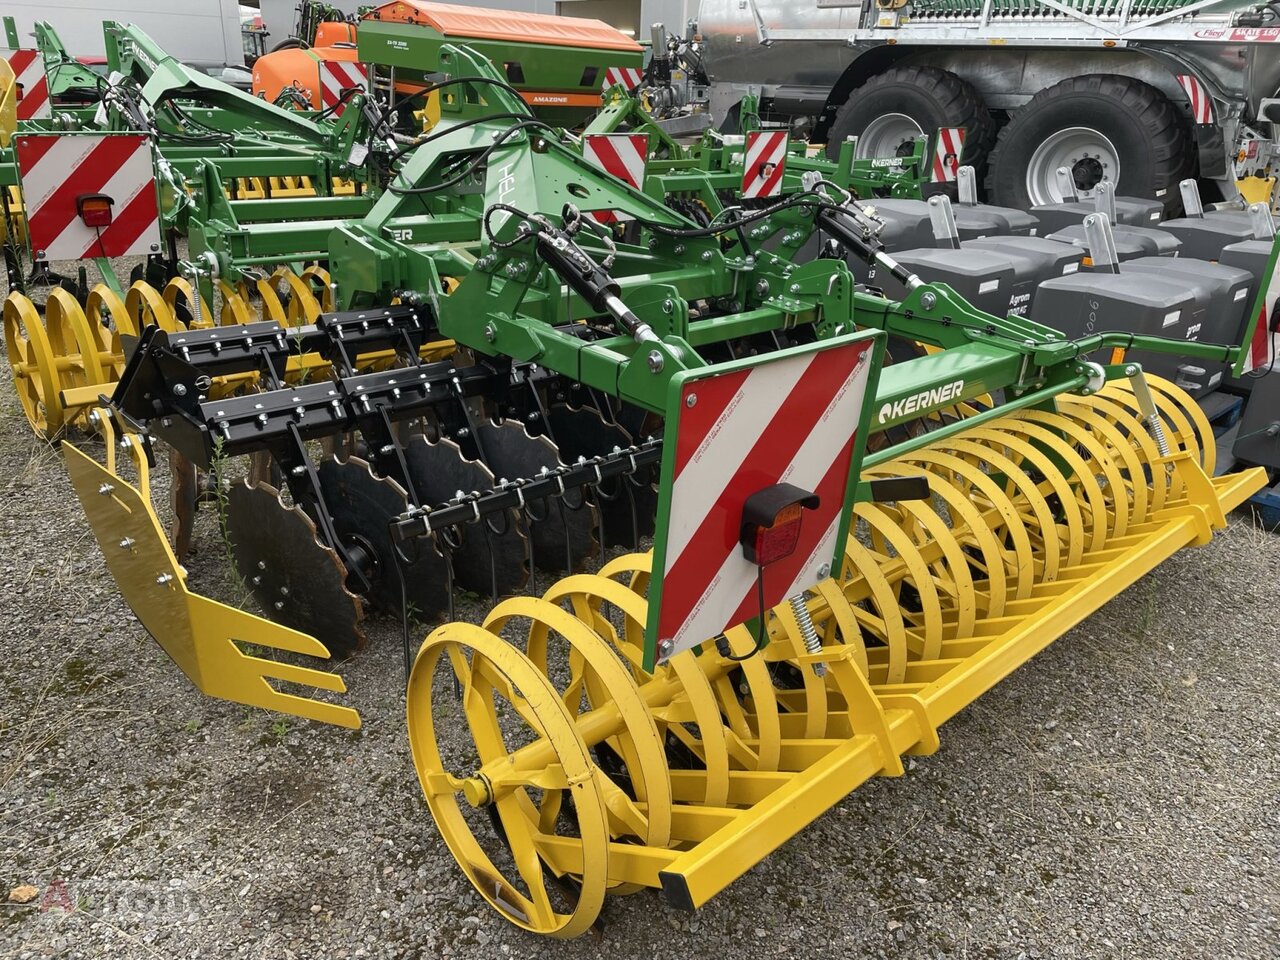 Cover crop neuf Kerner Helix H300: photos 3